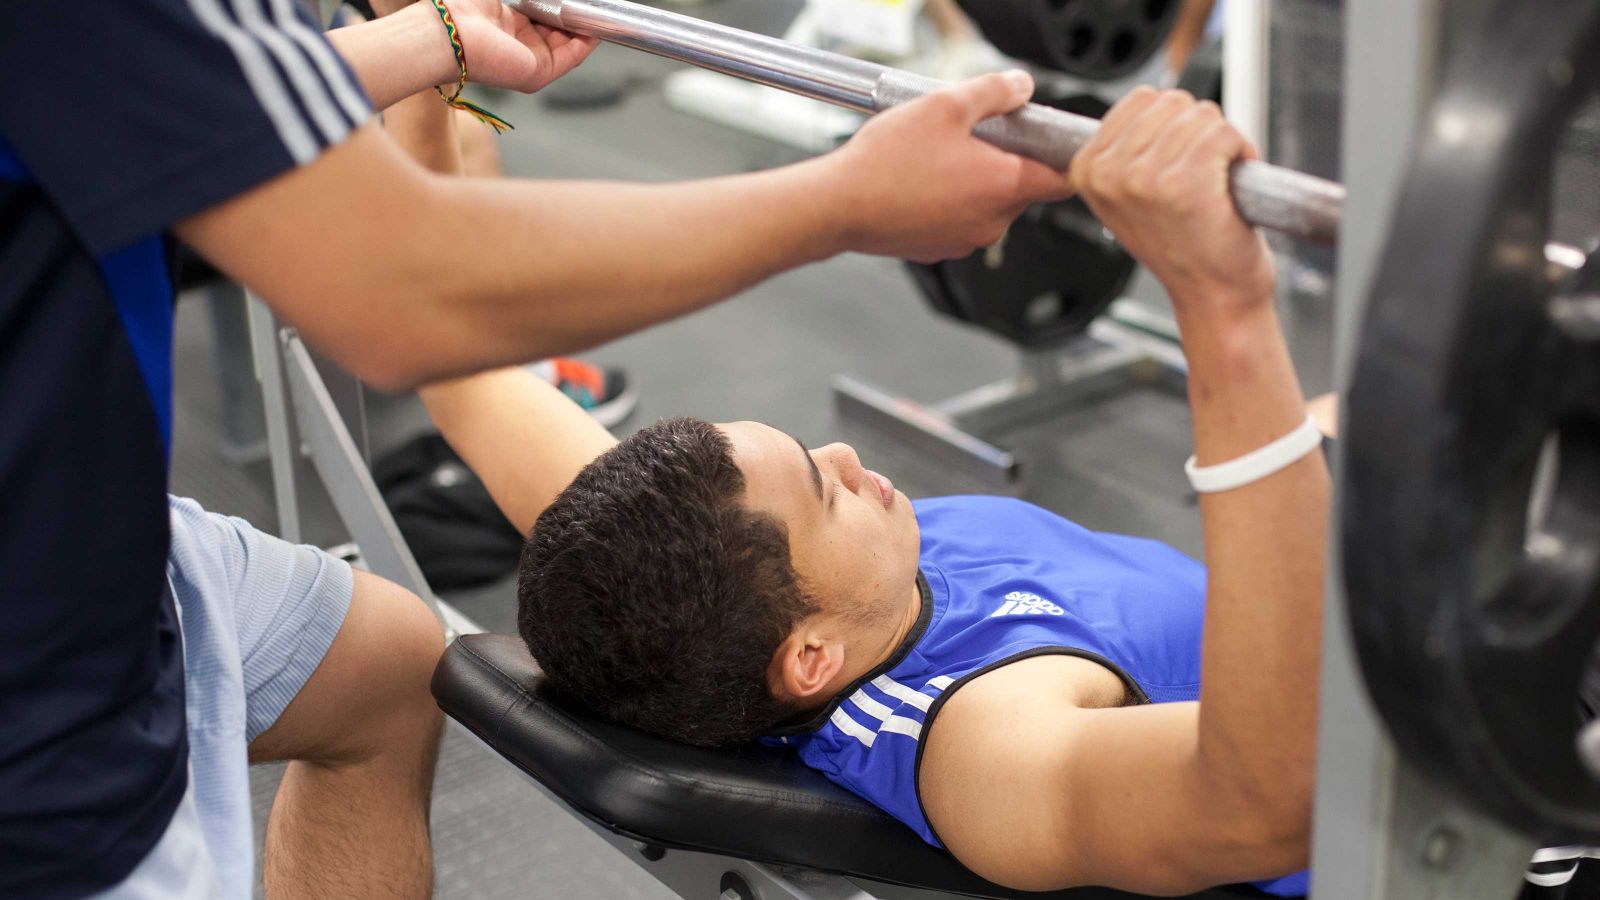 A Māori man lifts weights with a spotter on a bench press.